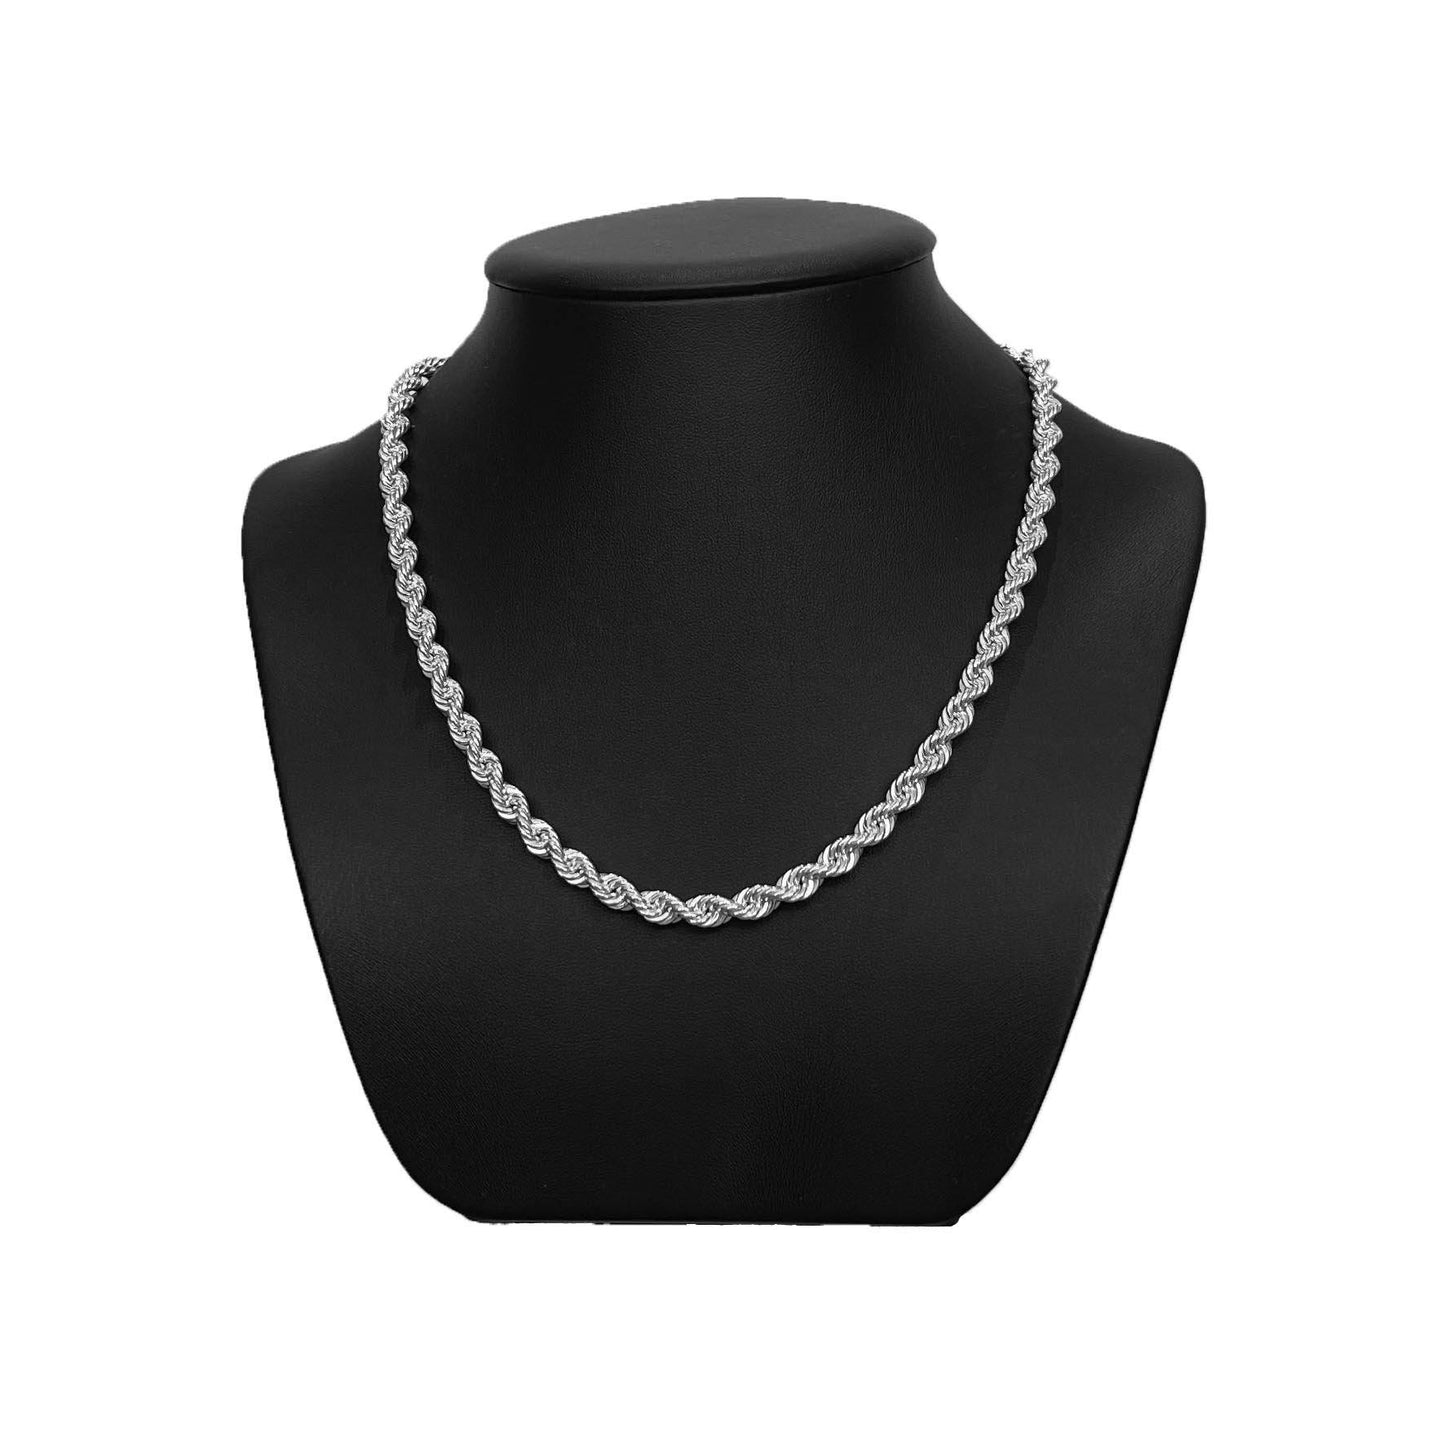 4.5mm Sterling Silver Rope Chain